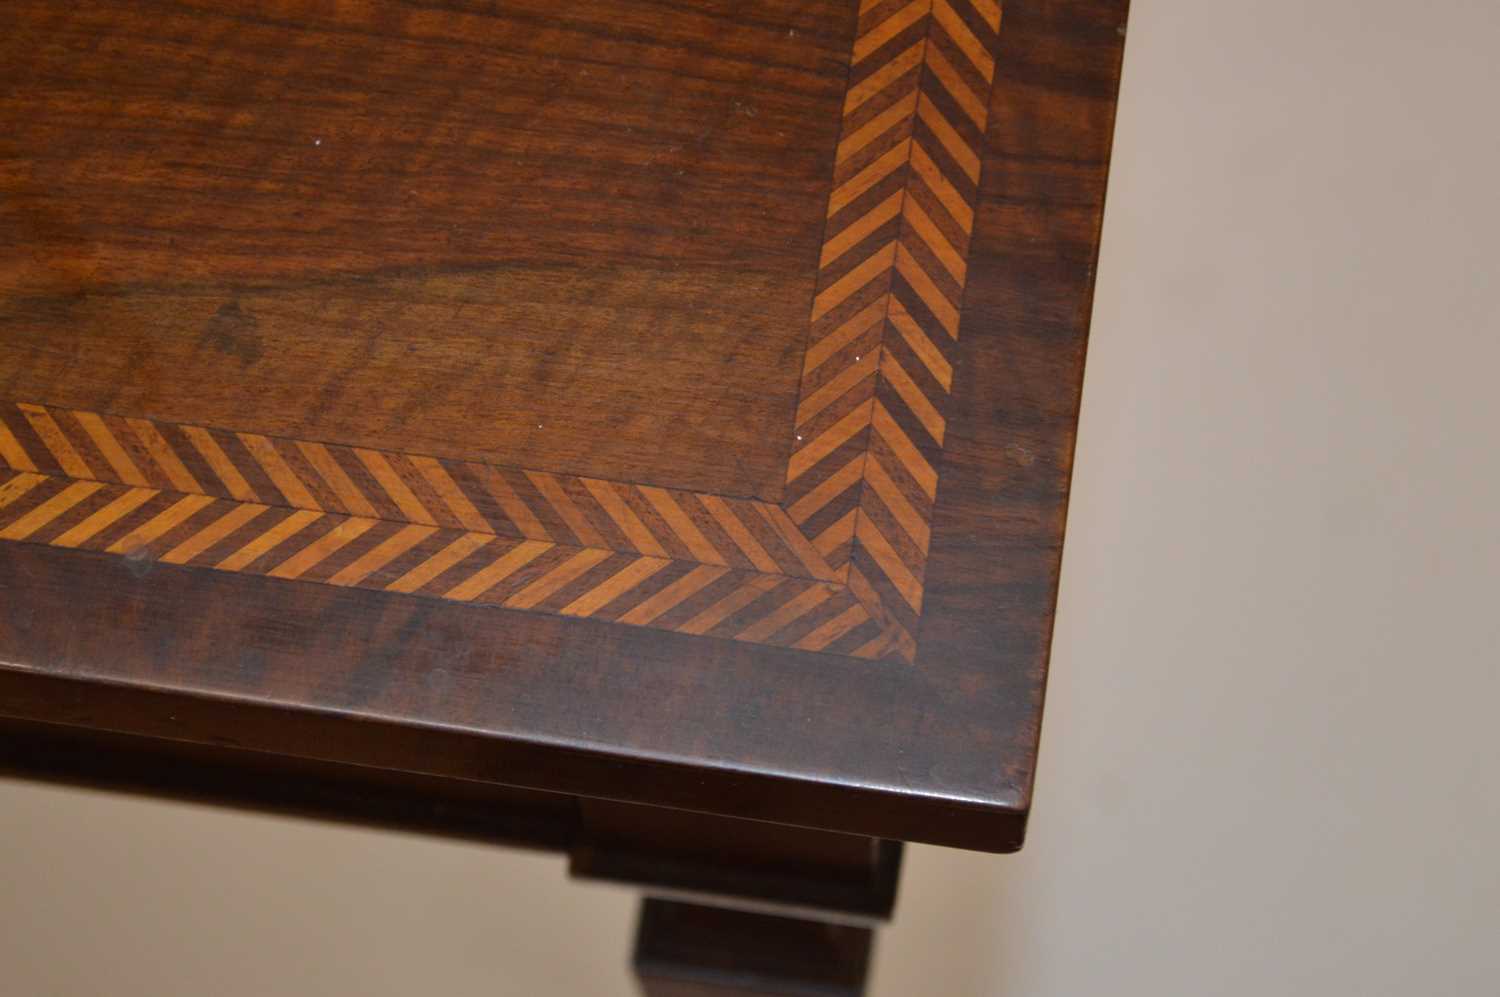 Edwardian Walnut Side Table with Parquetry Border - Image 3 of 7